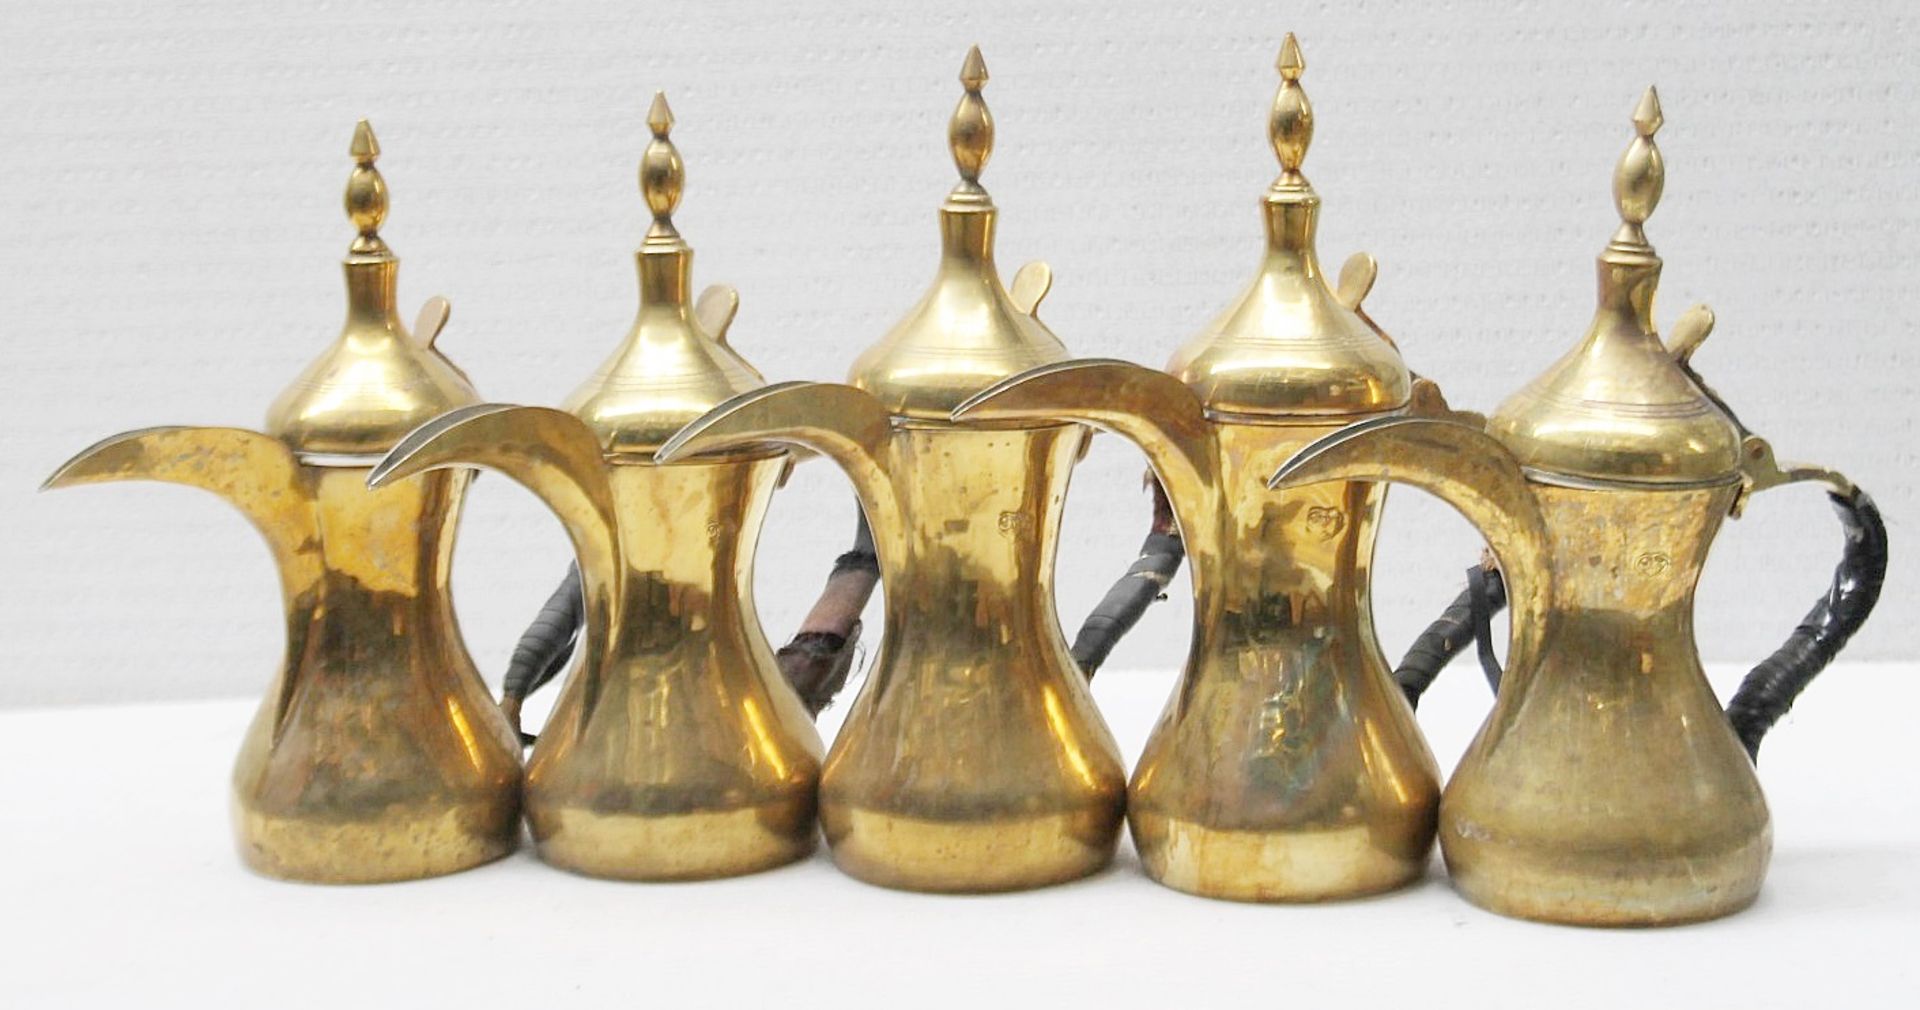 5 x Vintage Brass Arabic Dallah Coffee Pots - Recently Removed From A Well-known London Department